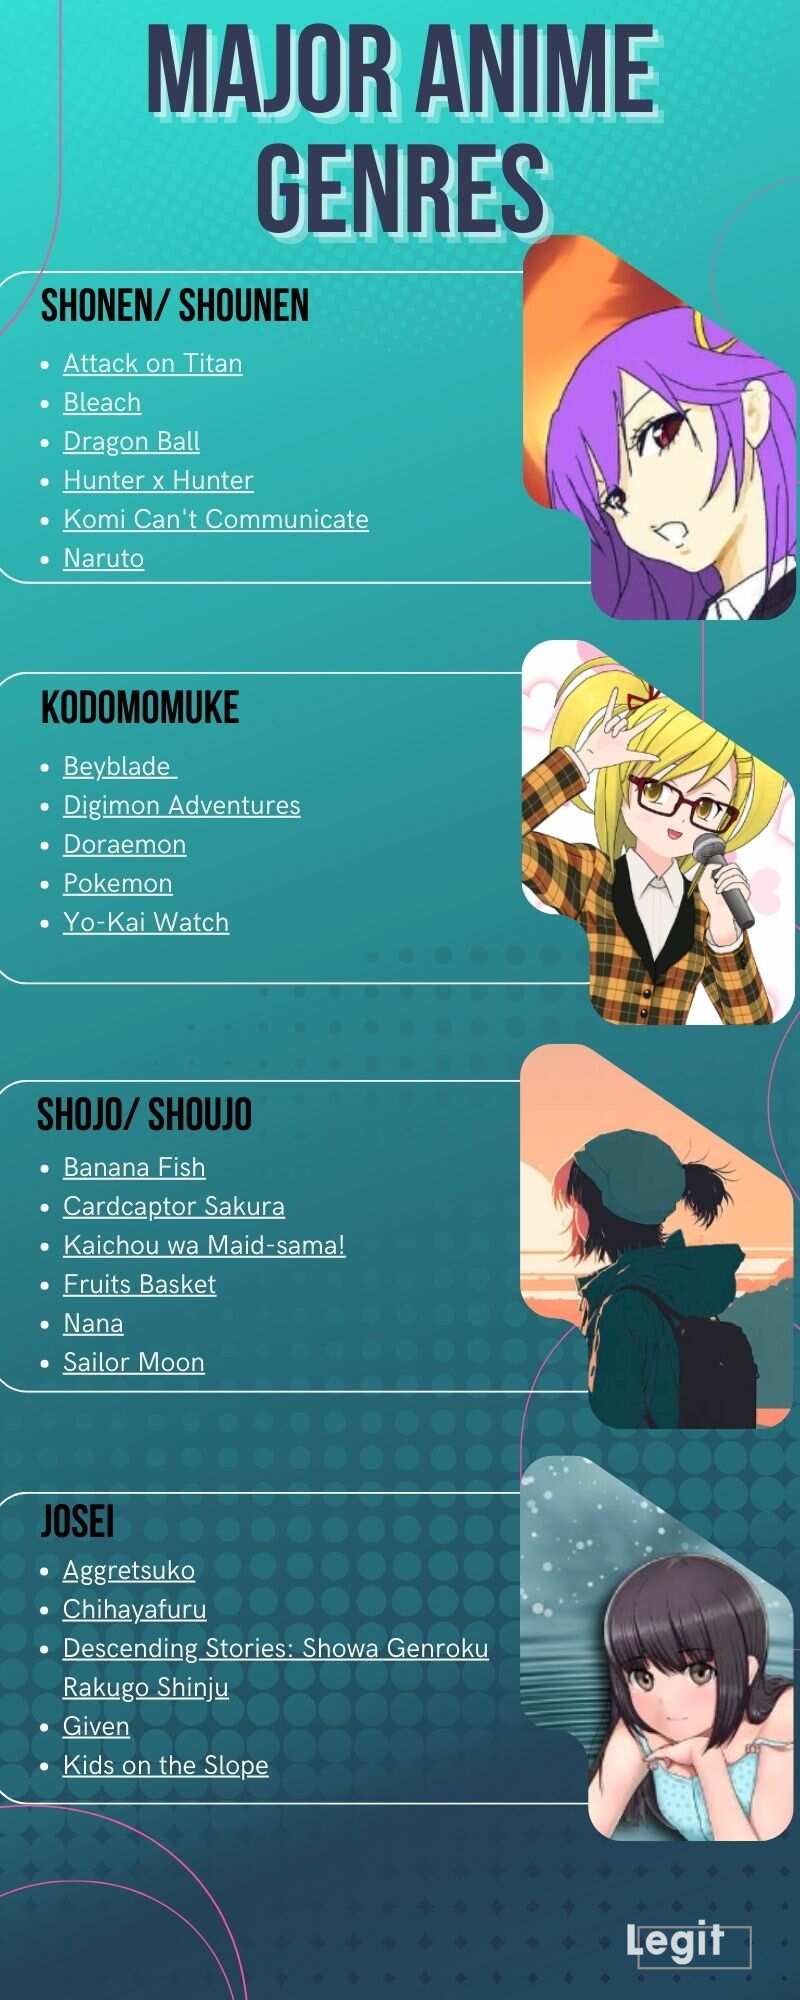 Major anime genres listed and explained